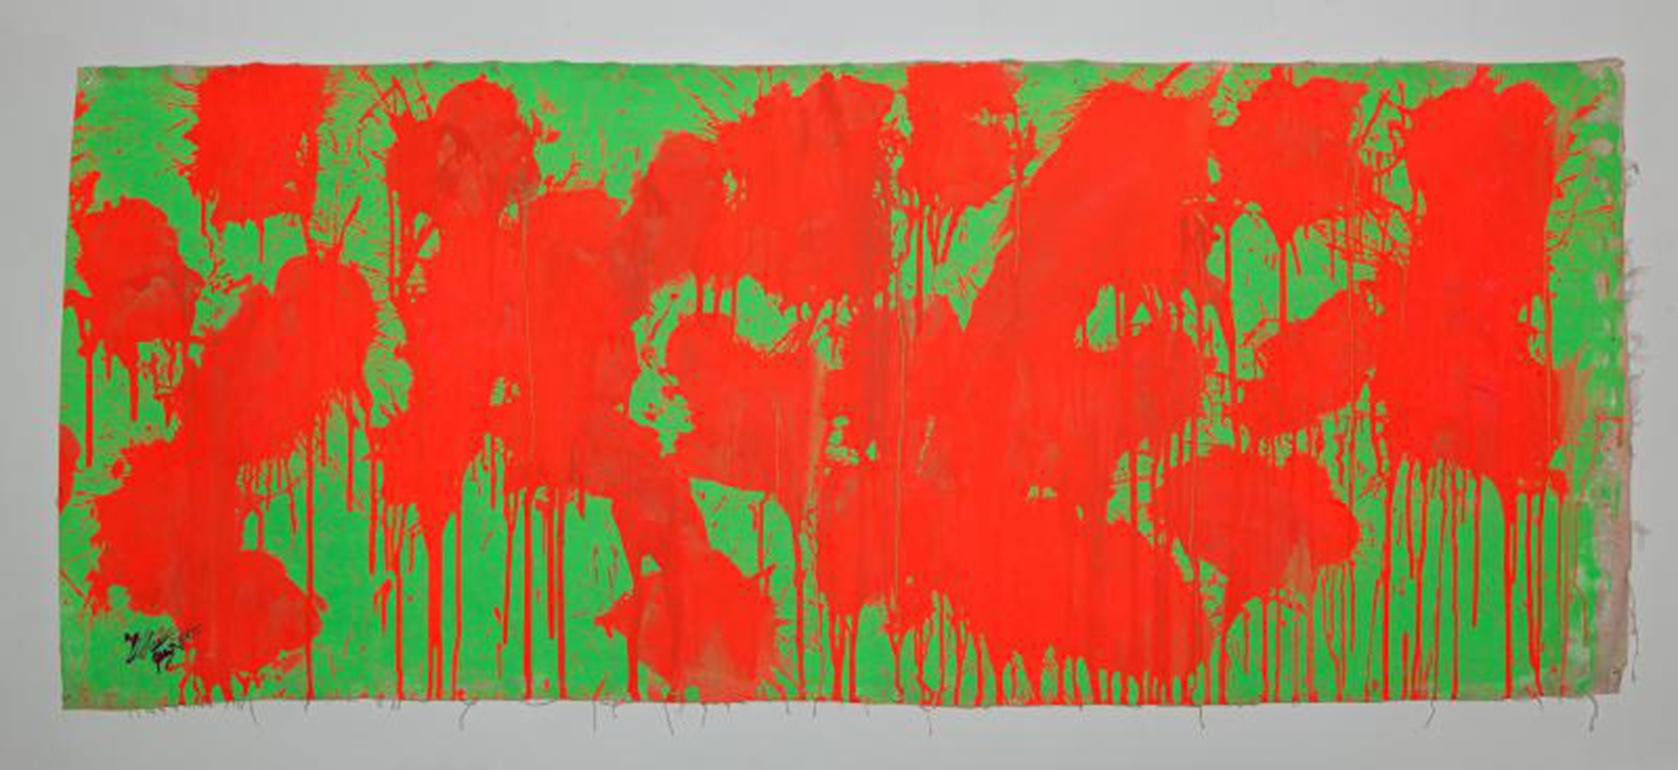 Ushio Shinohara Abstract Painting - "Red on Green – May 28, 2009, " Acrylic on Canvas - Abstract Boxing painting